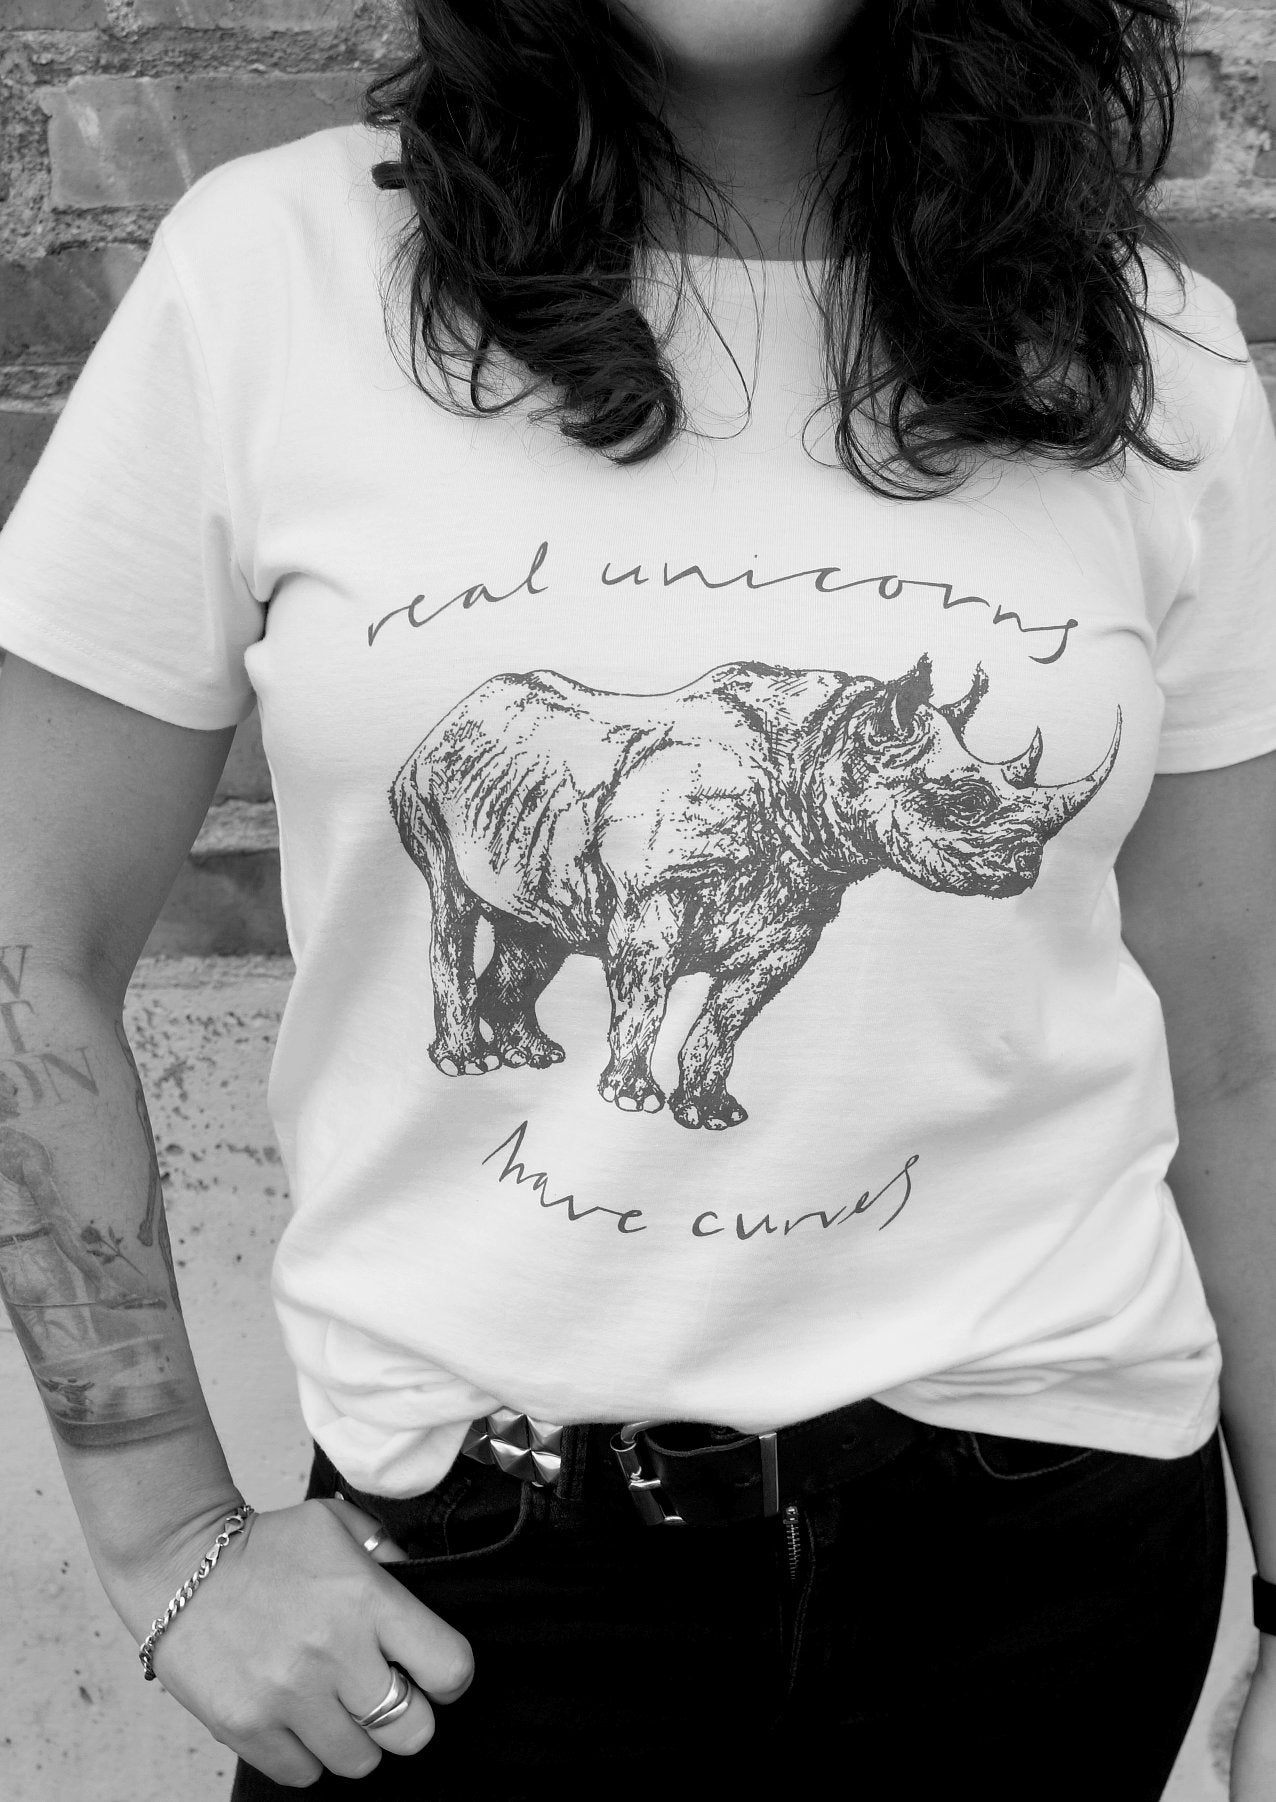 Real unicorns have curves T-shirt